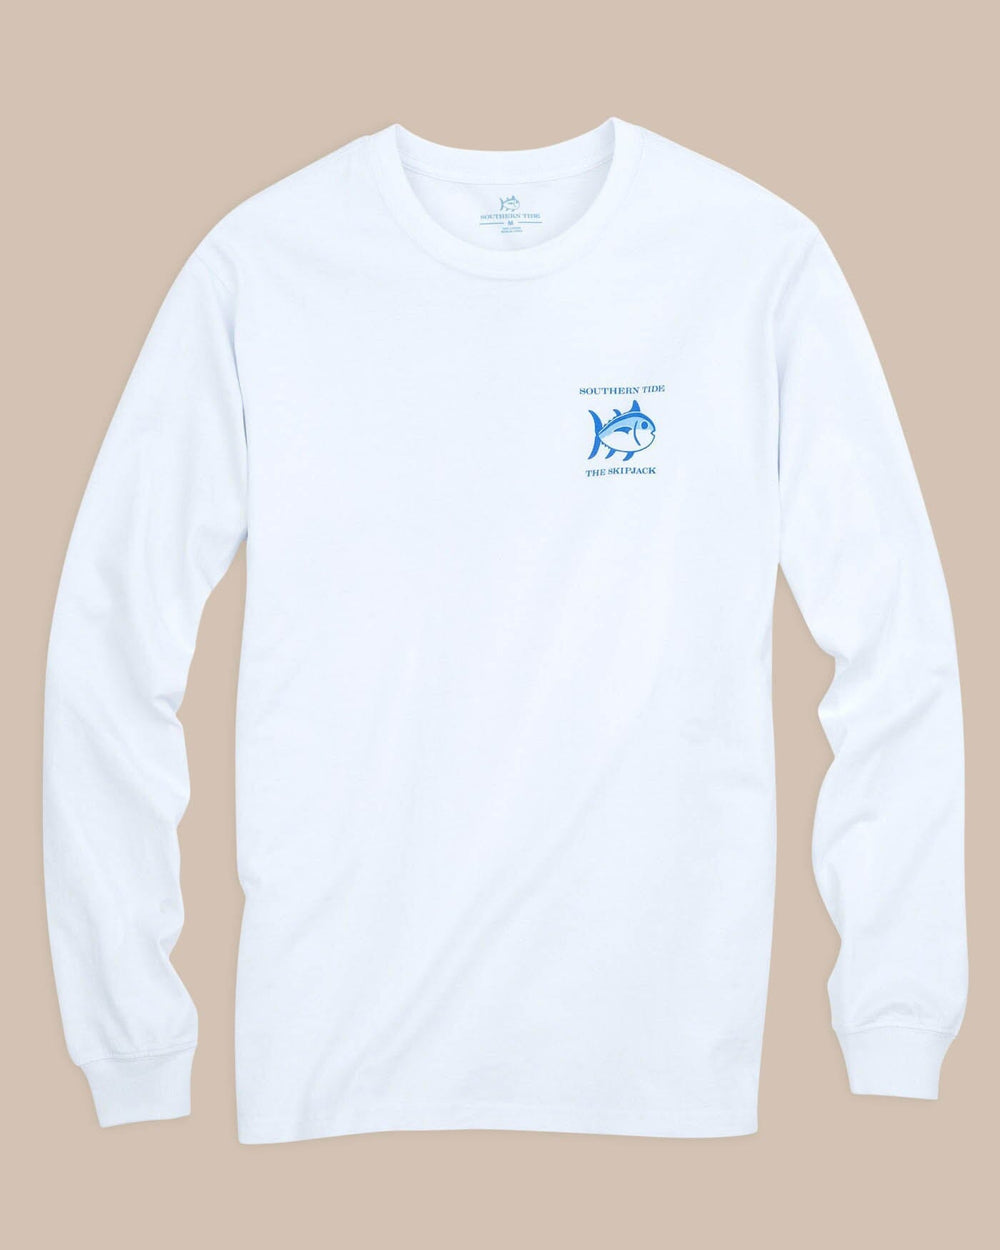 The front view of the Men's White Long Sleeve Original Skipjack T-shirt by Southern Tide - Classic White